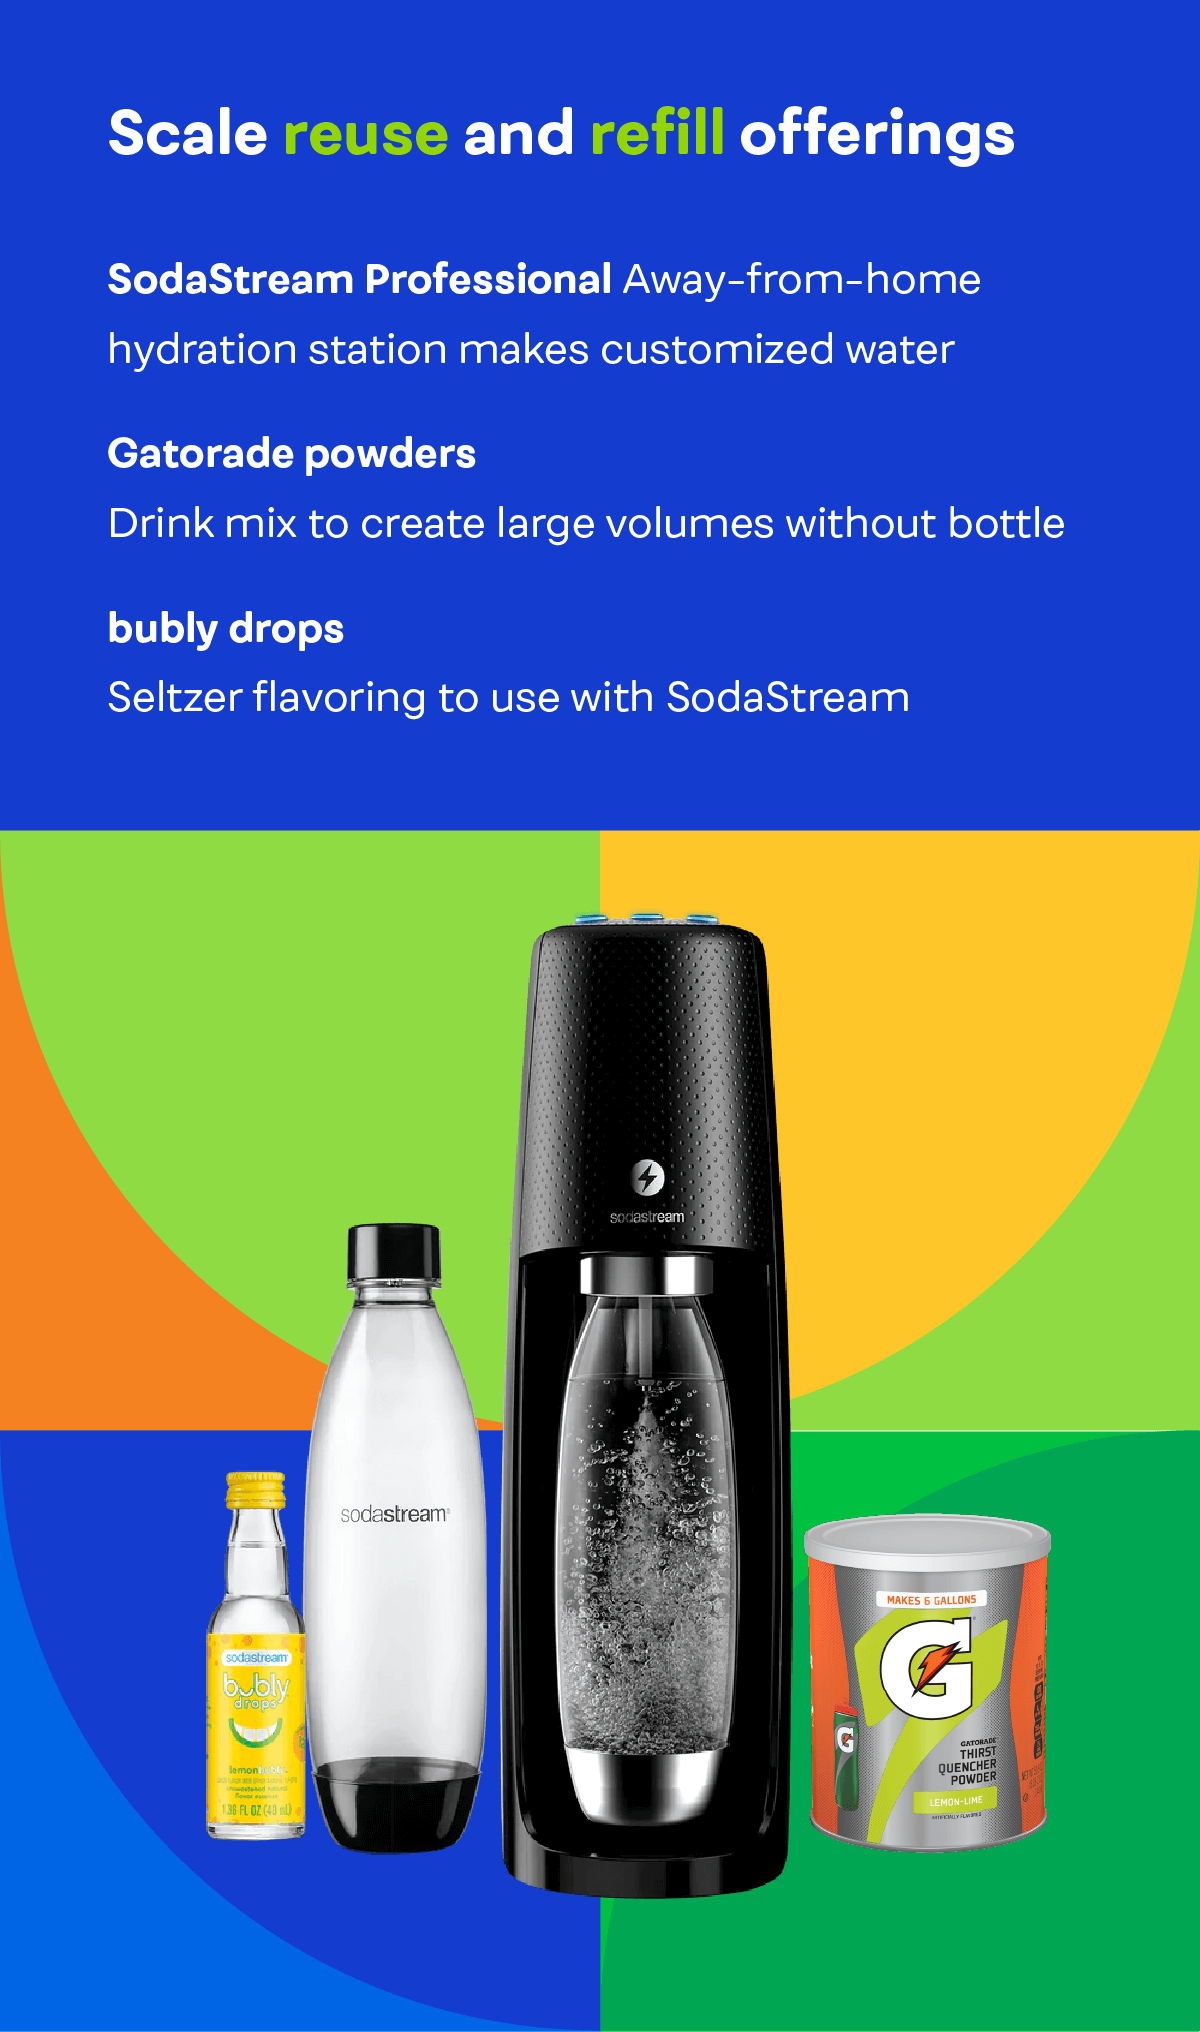 Scale reuse and refill offerings. SodaStream Professional, Gatorade powders, bubly drops.